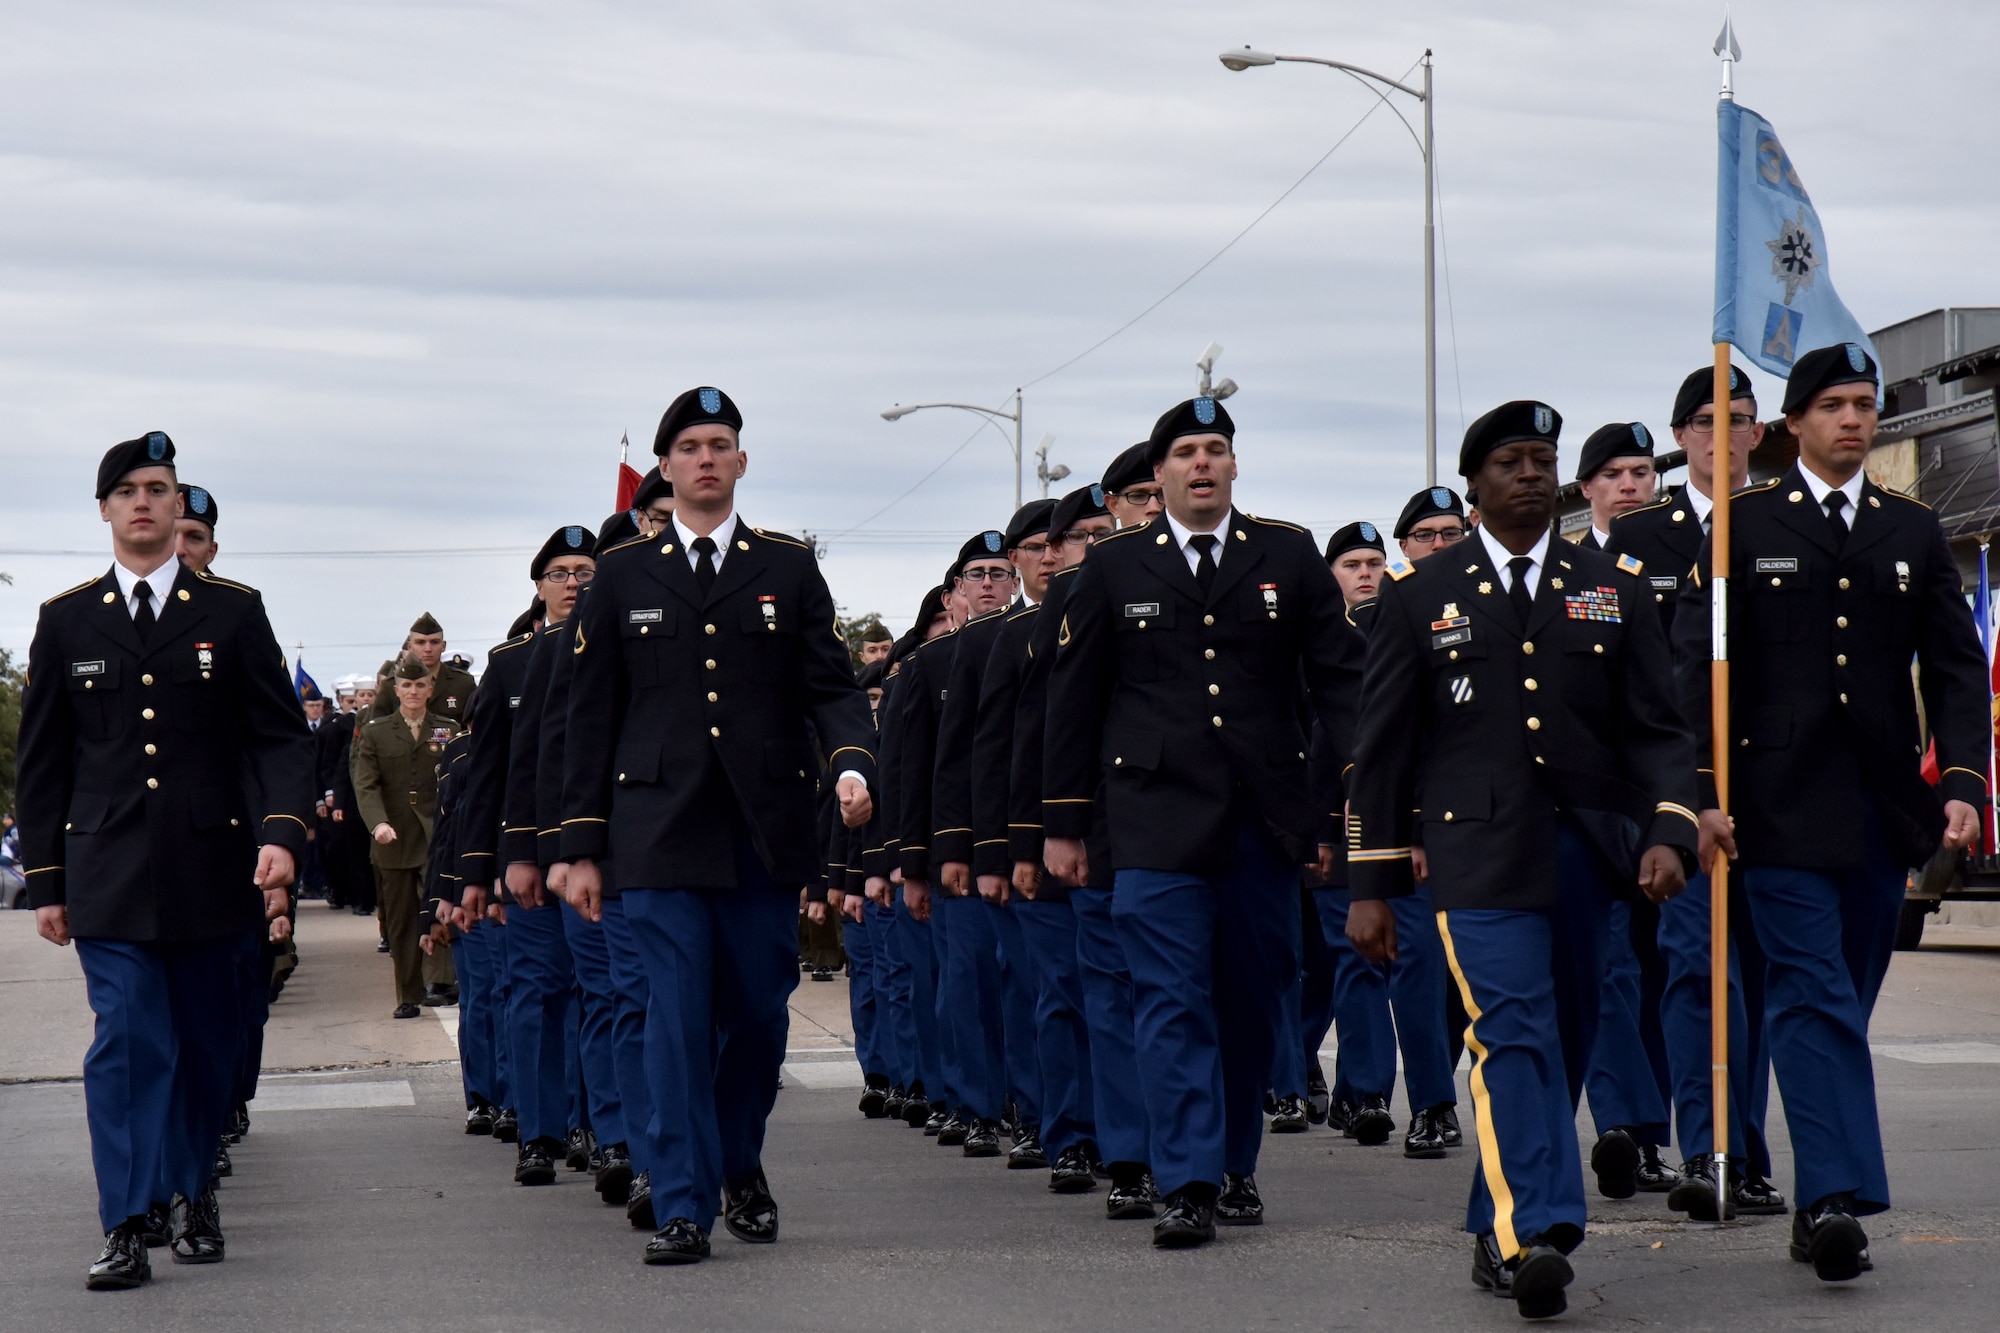 Army Soldiers from Goodfellow Air Force Base march in the Veterans Day Parade in San Angelo, Texas, Nov. 10, 2018. The parade featured veterans, active duty members and other organizations. (U.S. Air Force photo by 2nd Lt. Matthew Stott/Released)